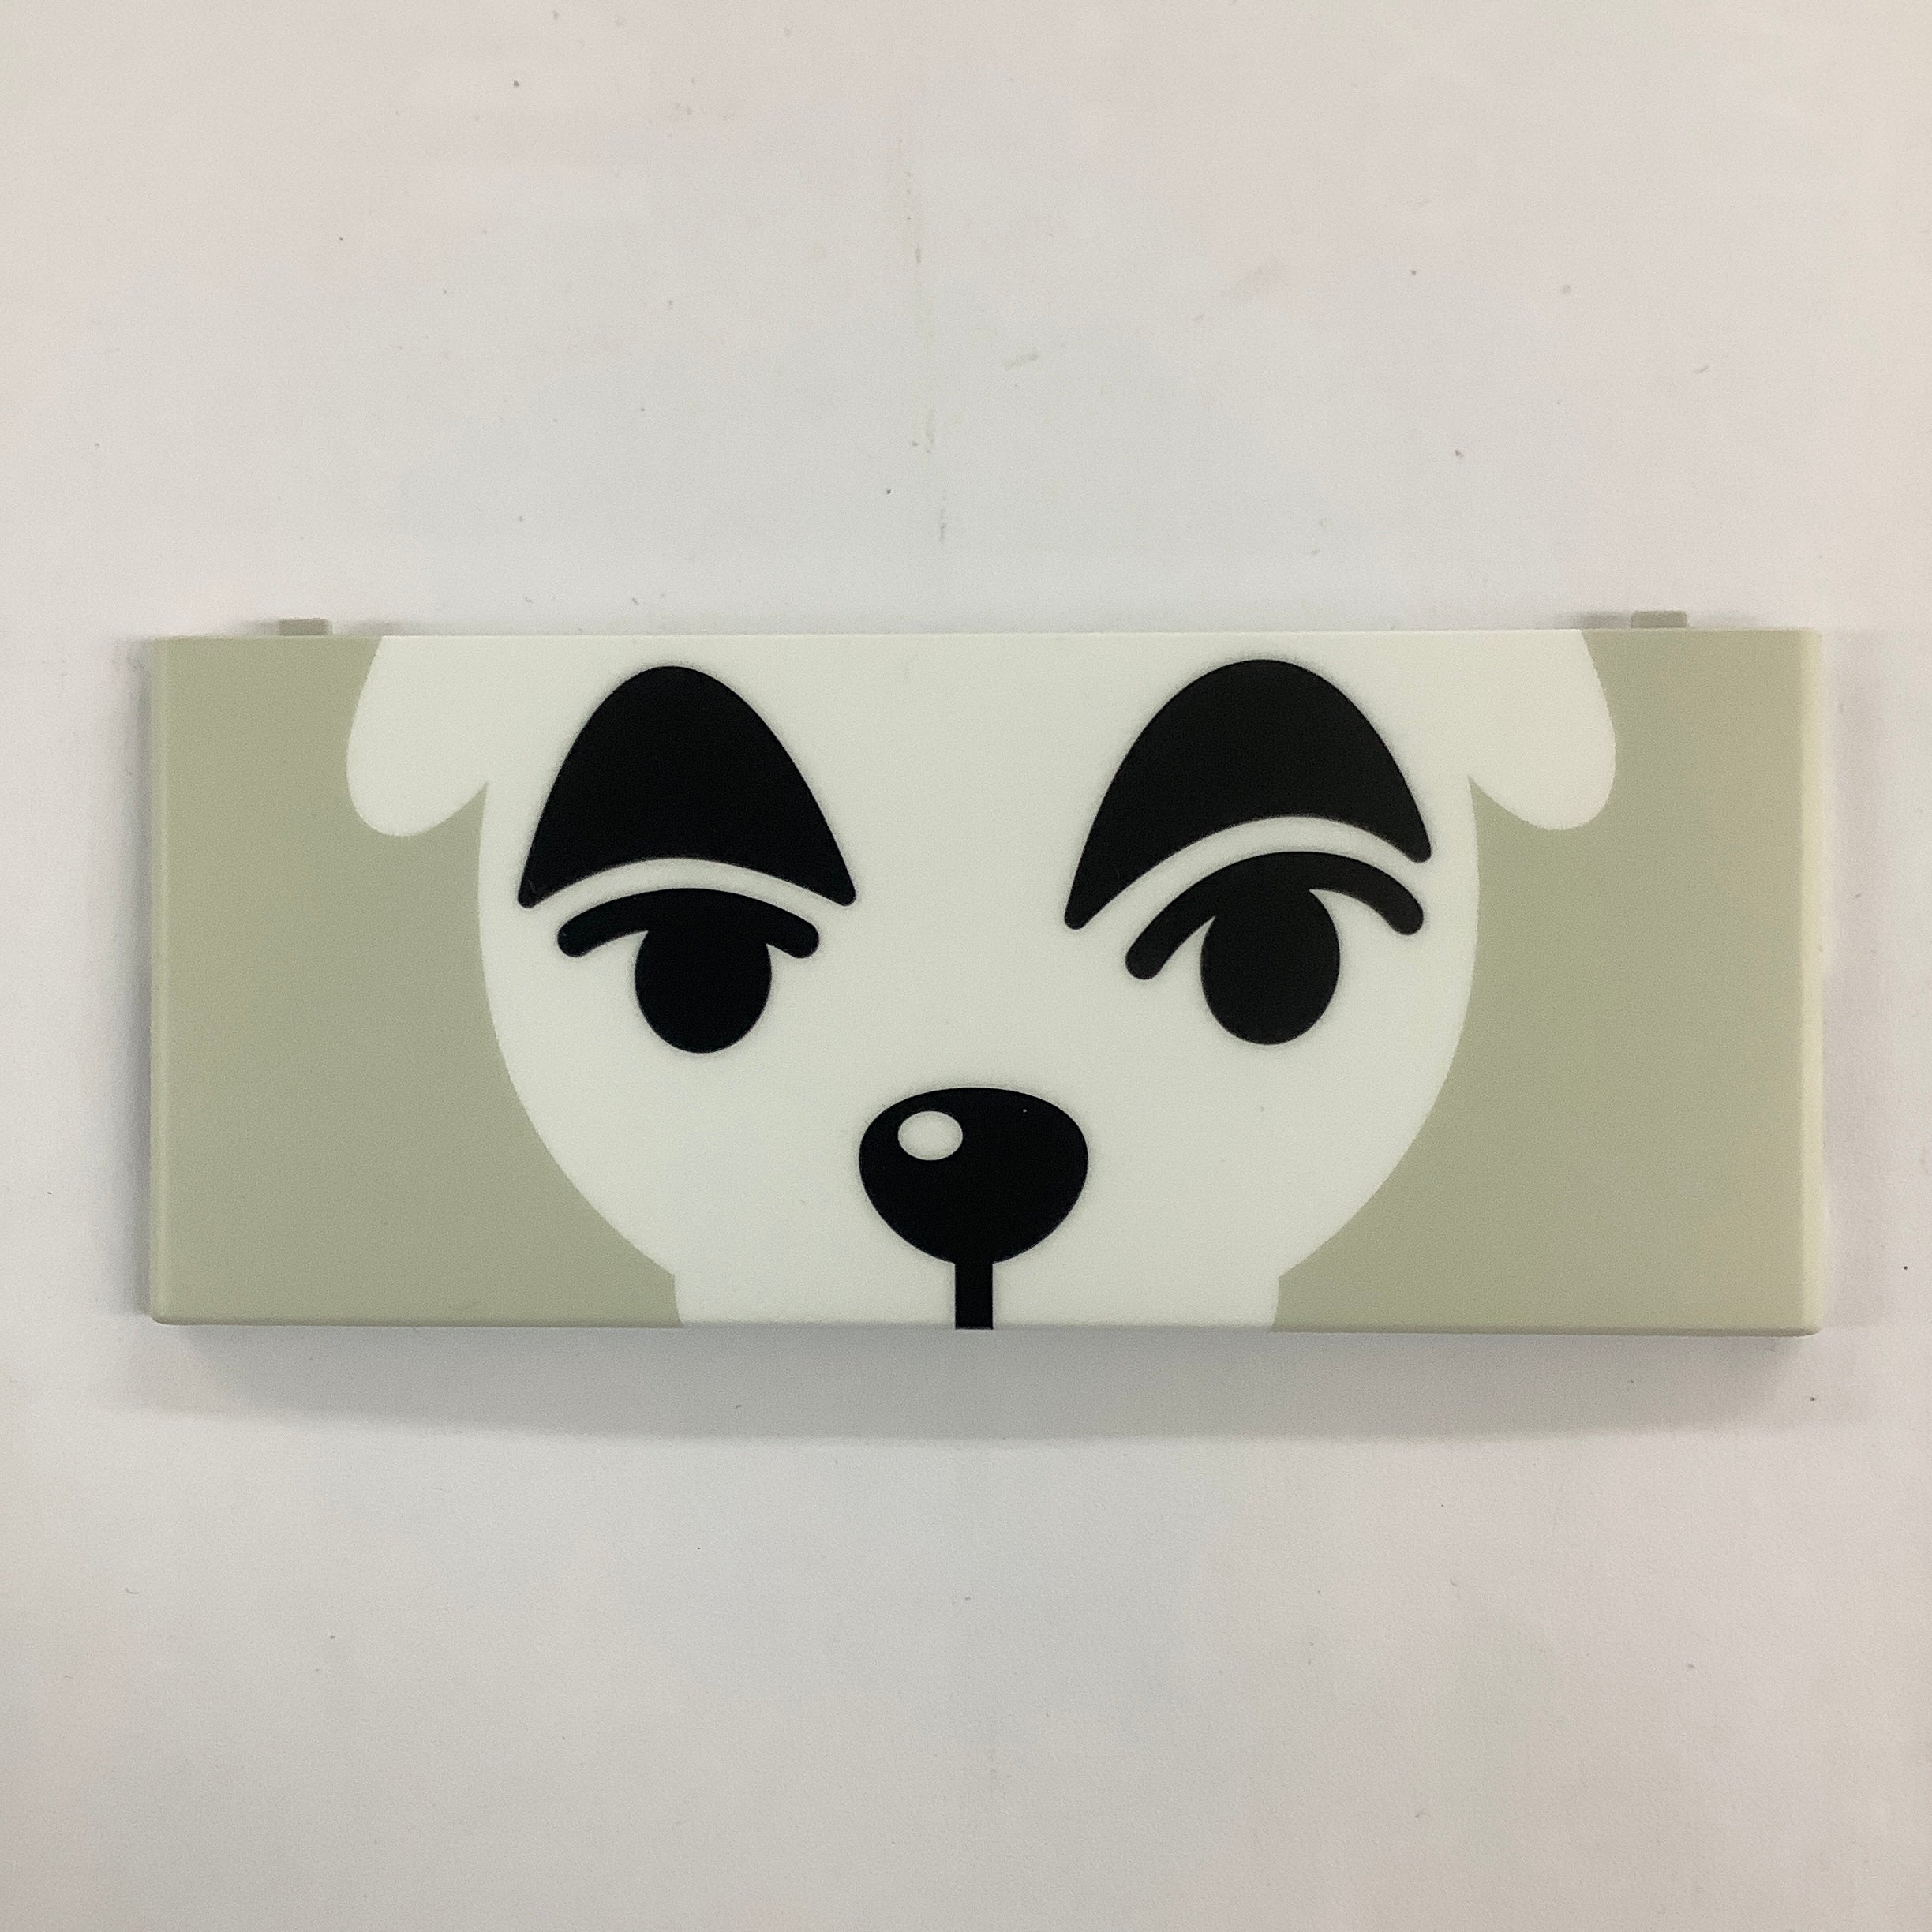 New Nintendo 3DS Cover Plates No.041 (Animal Crossing K.K Slider) - New Nintendo 3DS [Pre-Owned] (Japanese Import) Accessories Nintendo   